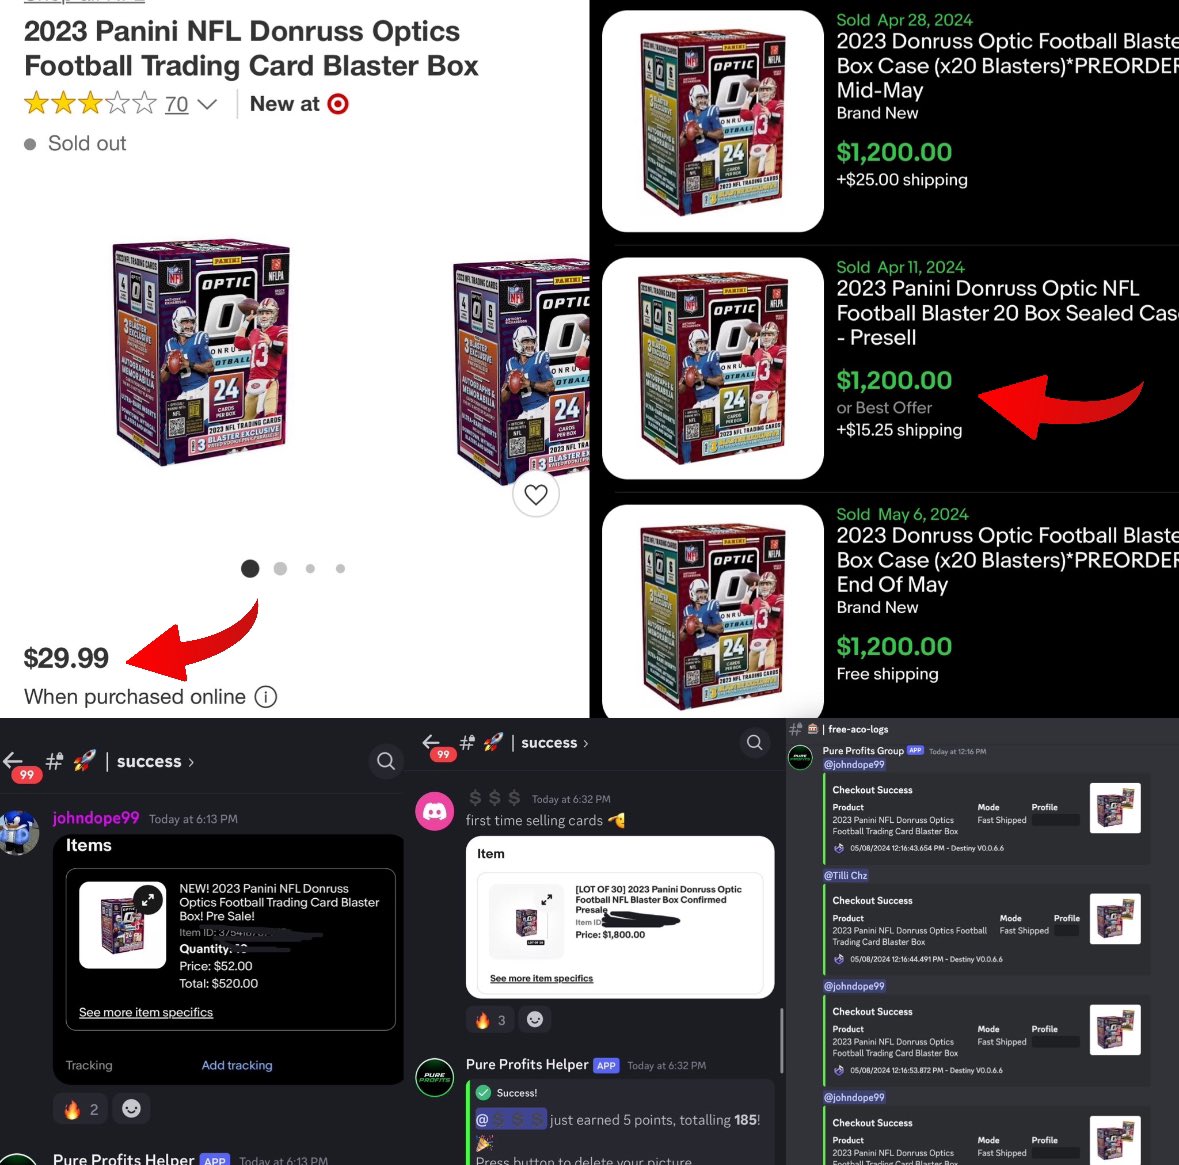 Believe it or not, the sports cards hype is back and members are making some EASY profits off of it! 🥱 - The NFL Optic release is catching some crazy demand and they are selling with fantastic volume on eBay! 🤝 - The game plan is to buy bulk and sell bulk. We have been